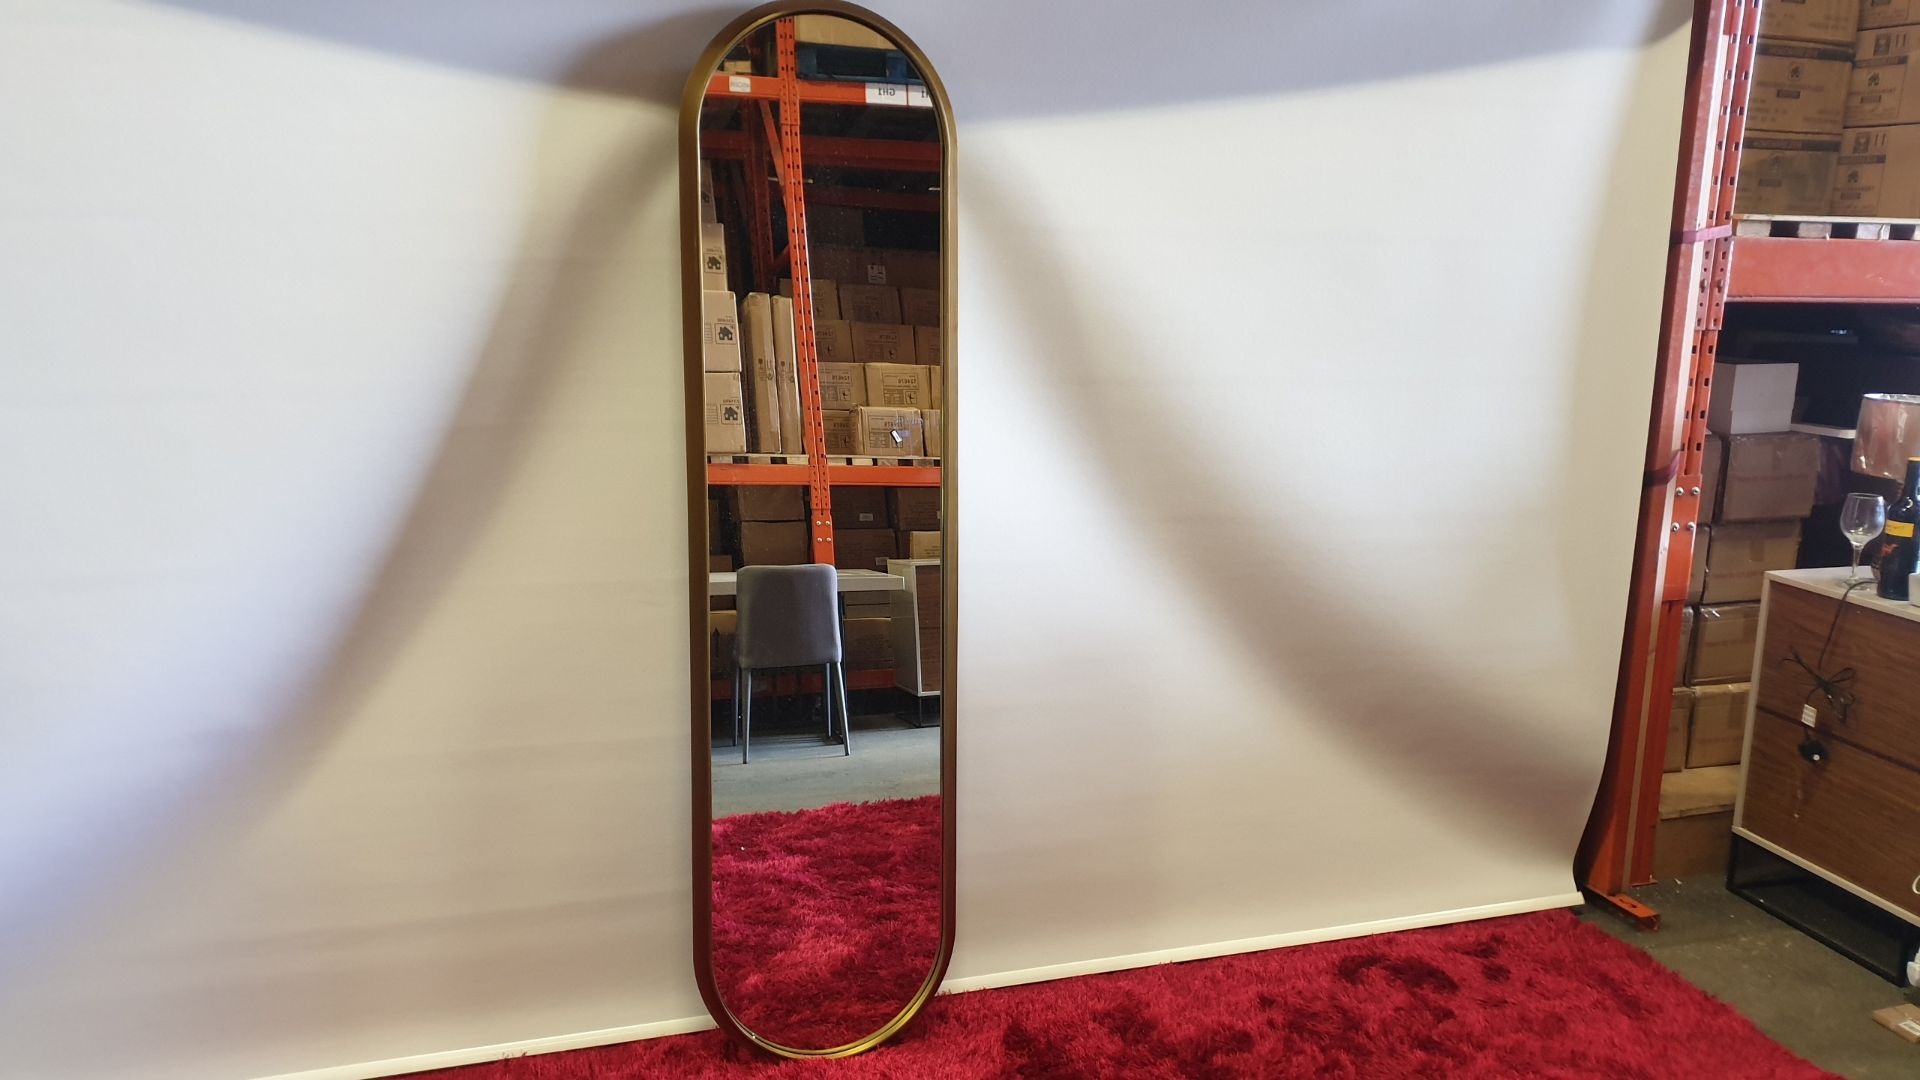 BRAND NEW BOXED LARGE GOLD TRIM WALL MIRROR WITH HANGING BARCKETS SIZE 500 X 96 X 1950 MM RRP £399.